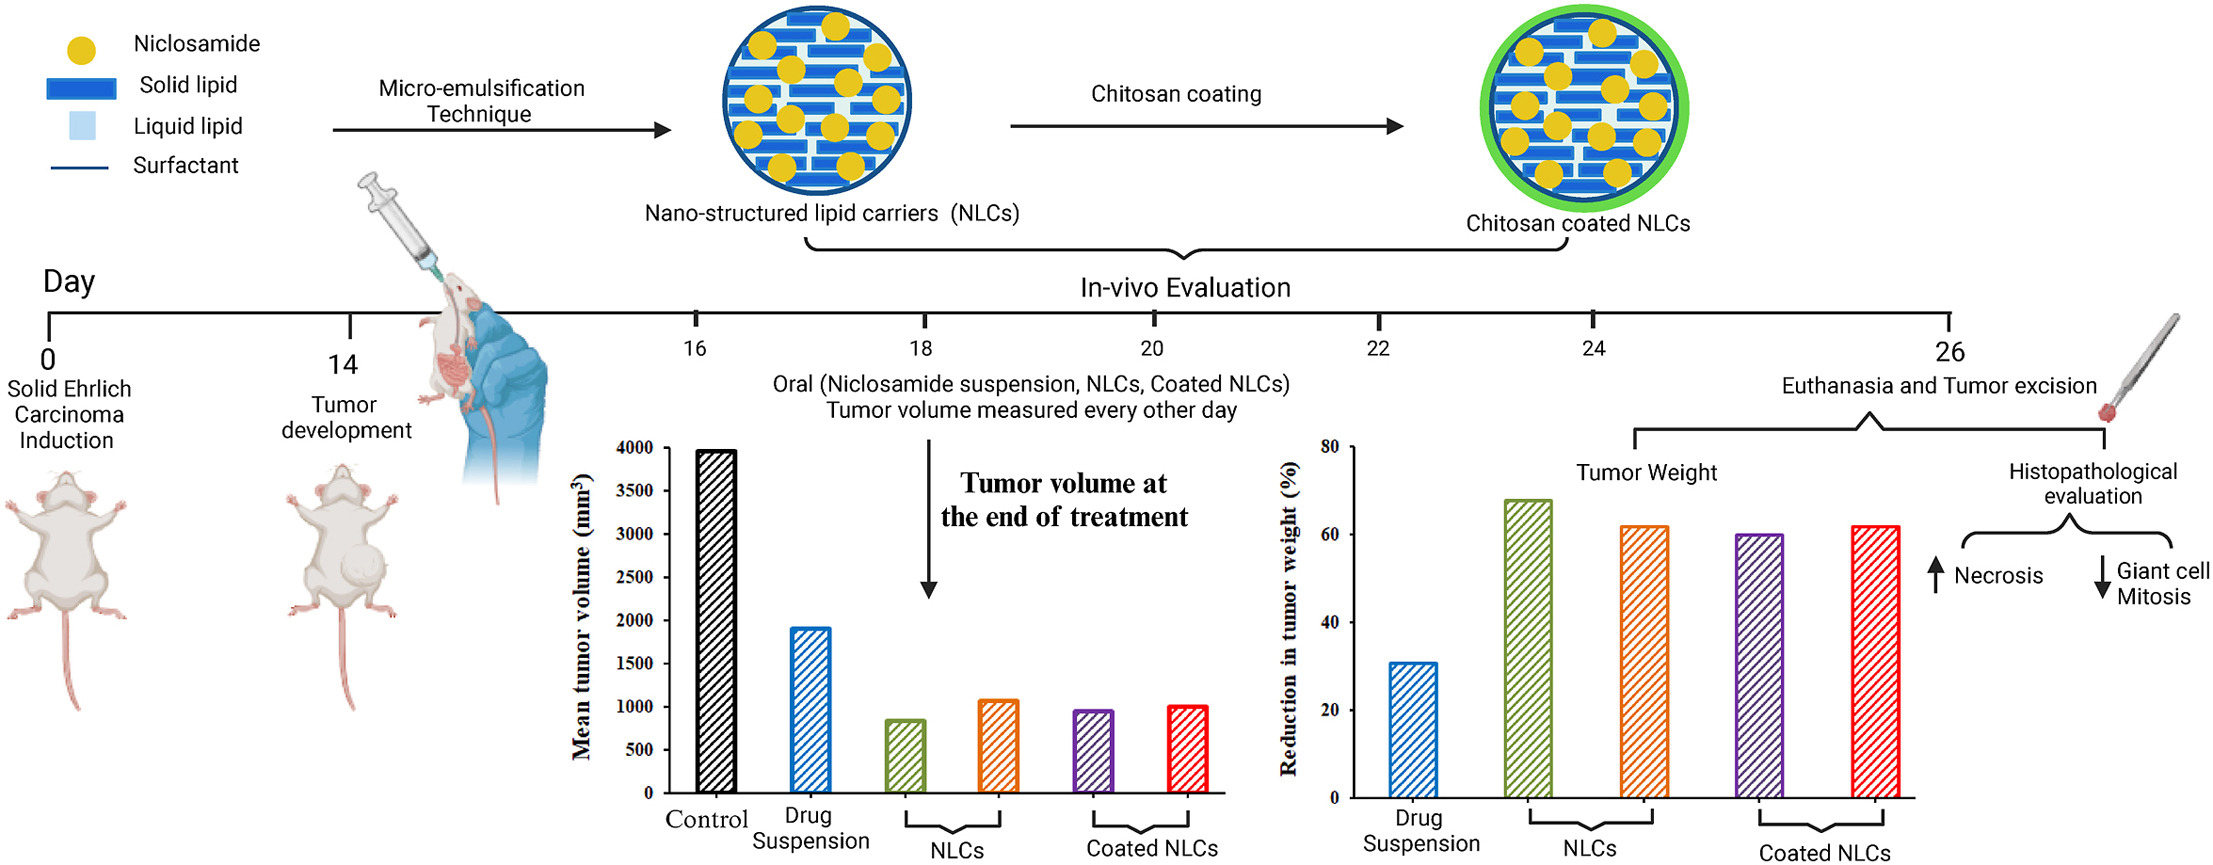 Chitosan coated lipid carriers as nanoplatform for repurposed anti-breast cancer activity of niclosamide